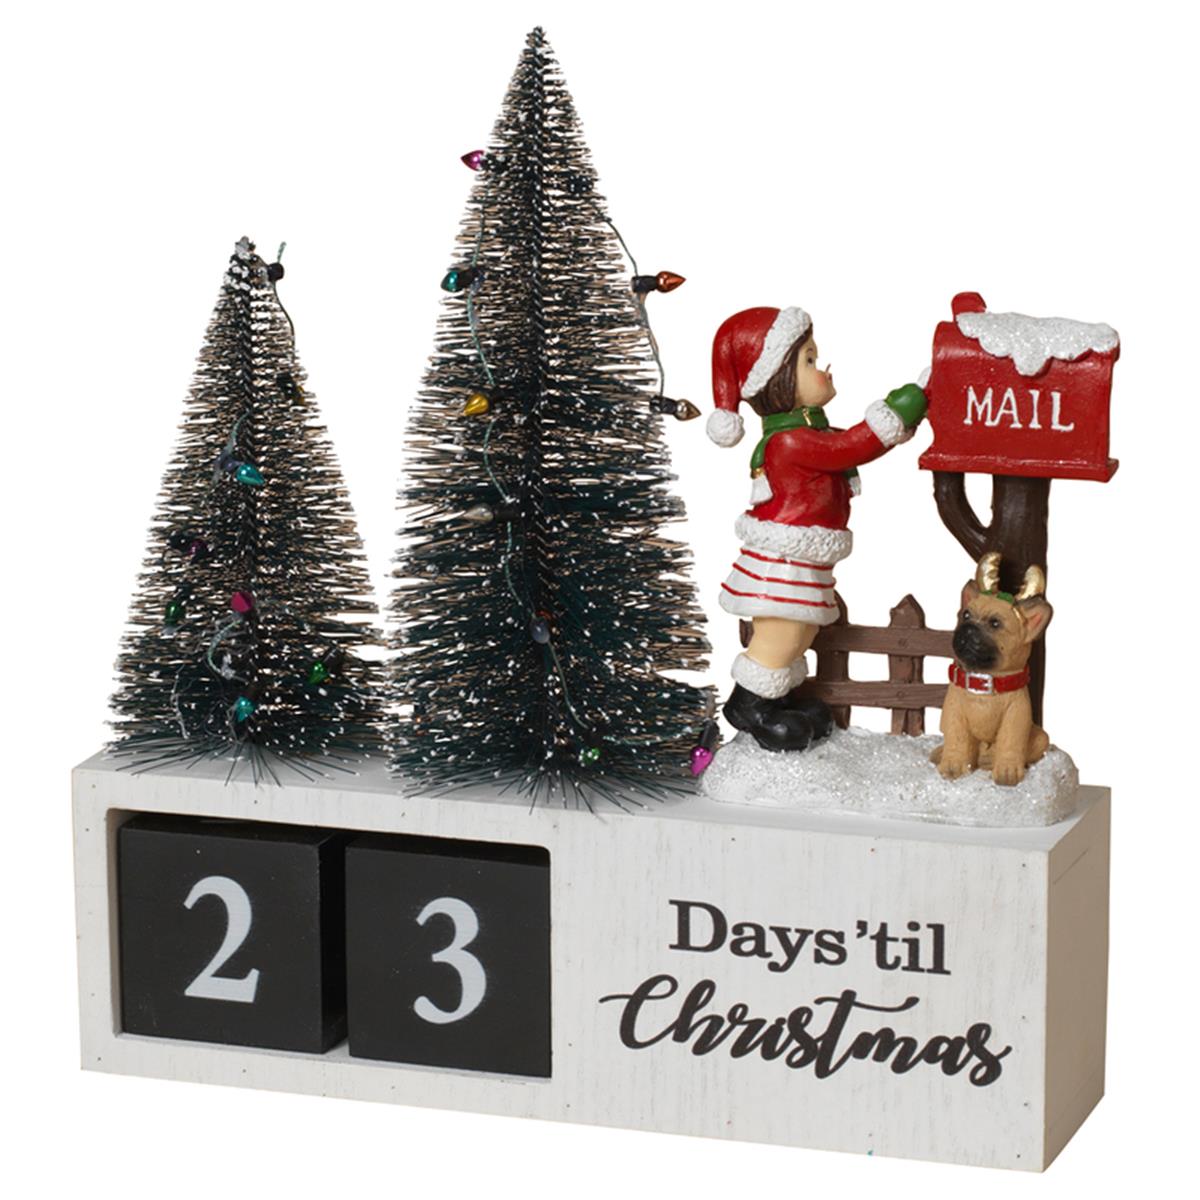 Picture of Gerson 9070228 Countdown Calendar Indoor Christmas Decor, Multi Color - Pack of 2